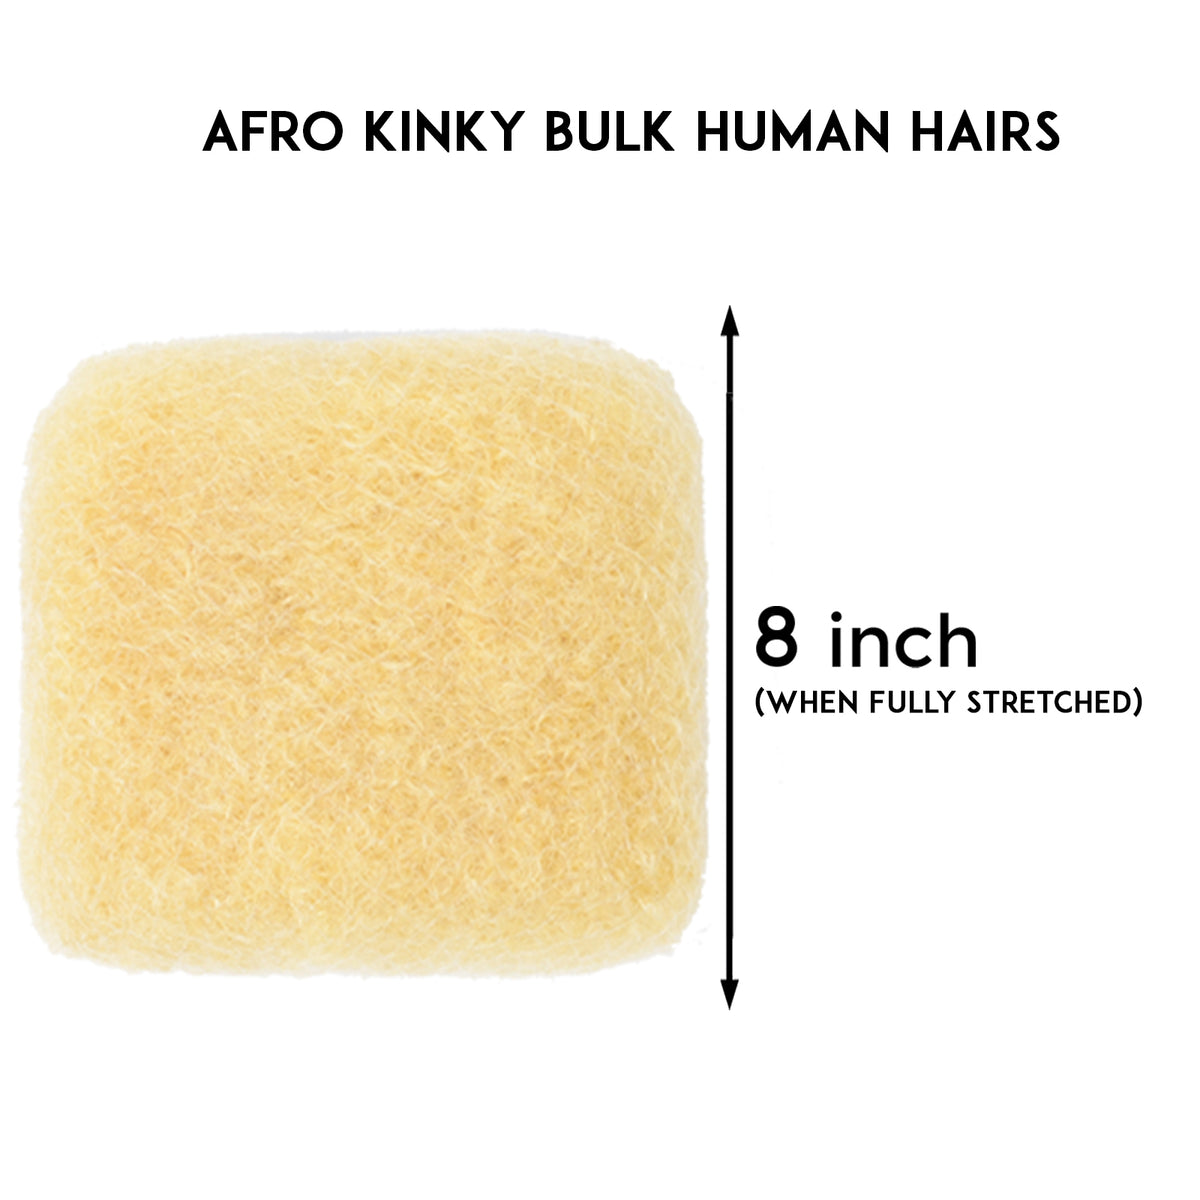 Afro Kinky Human Hairs For Making,Repairing & Bulking Locs 8 Inch Long Afro Kinky Bulk Human Hair For Dreadlock Extensions 100% Natural Afro Hairs For Twisting & Braiding 29g/1Oz (613/ Light Blonde, 8 Inch)